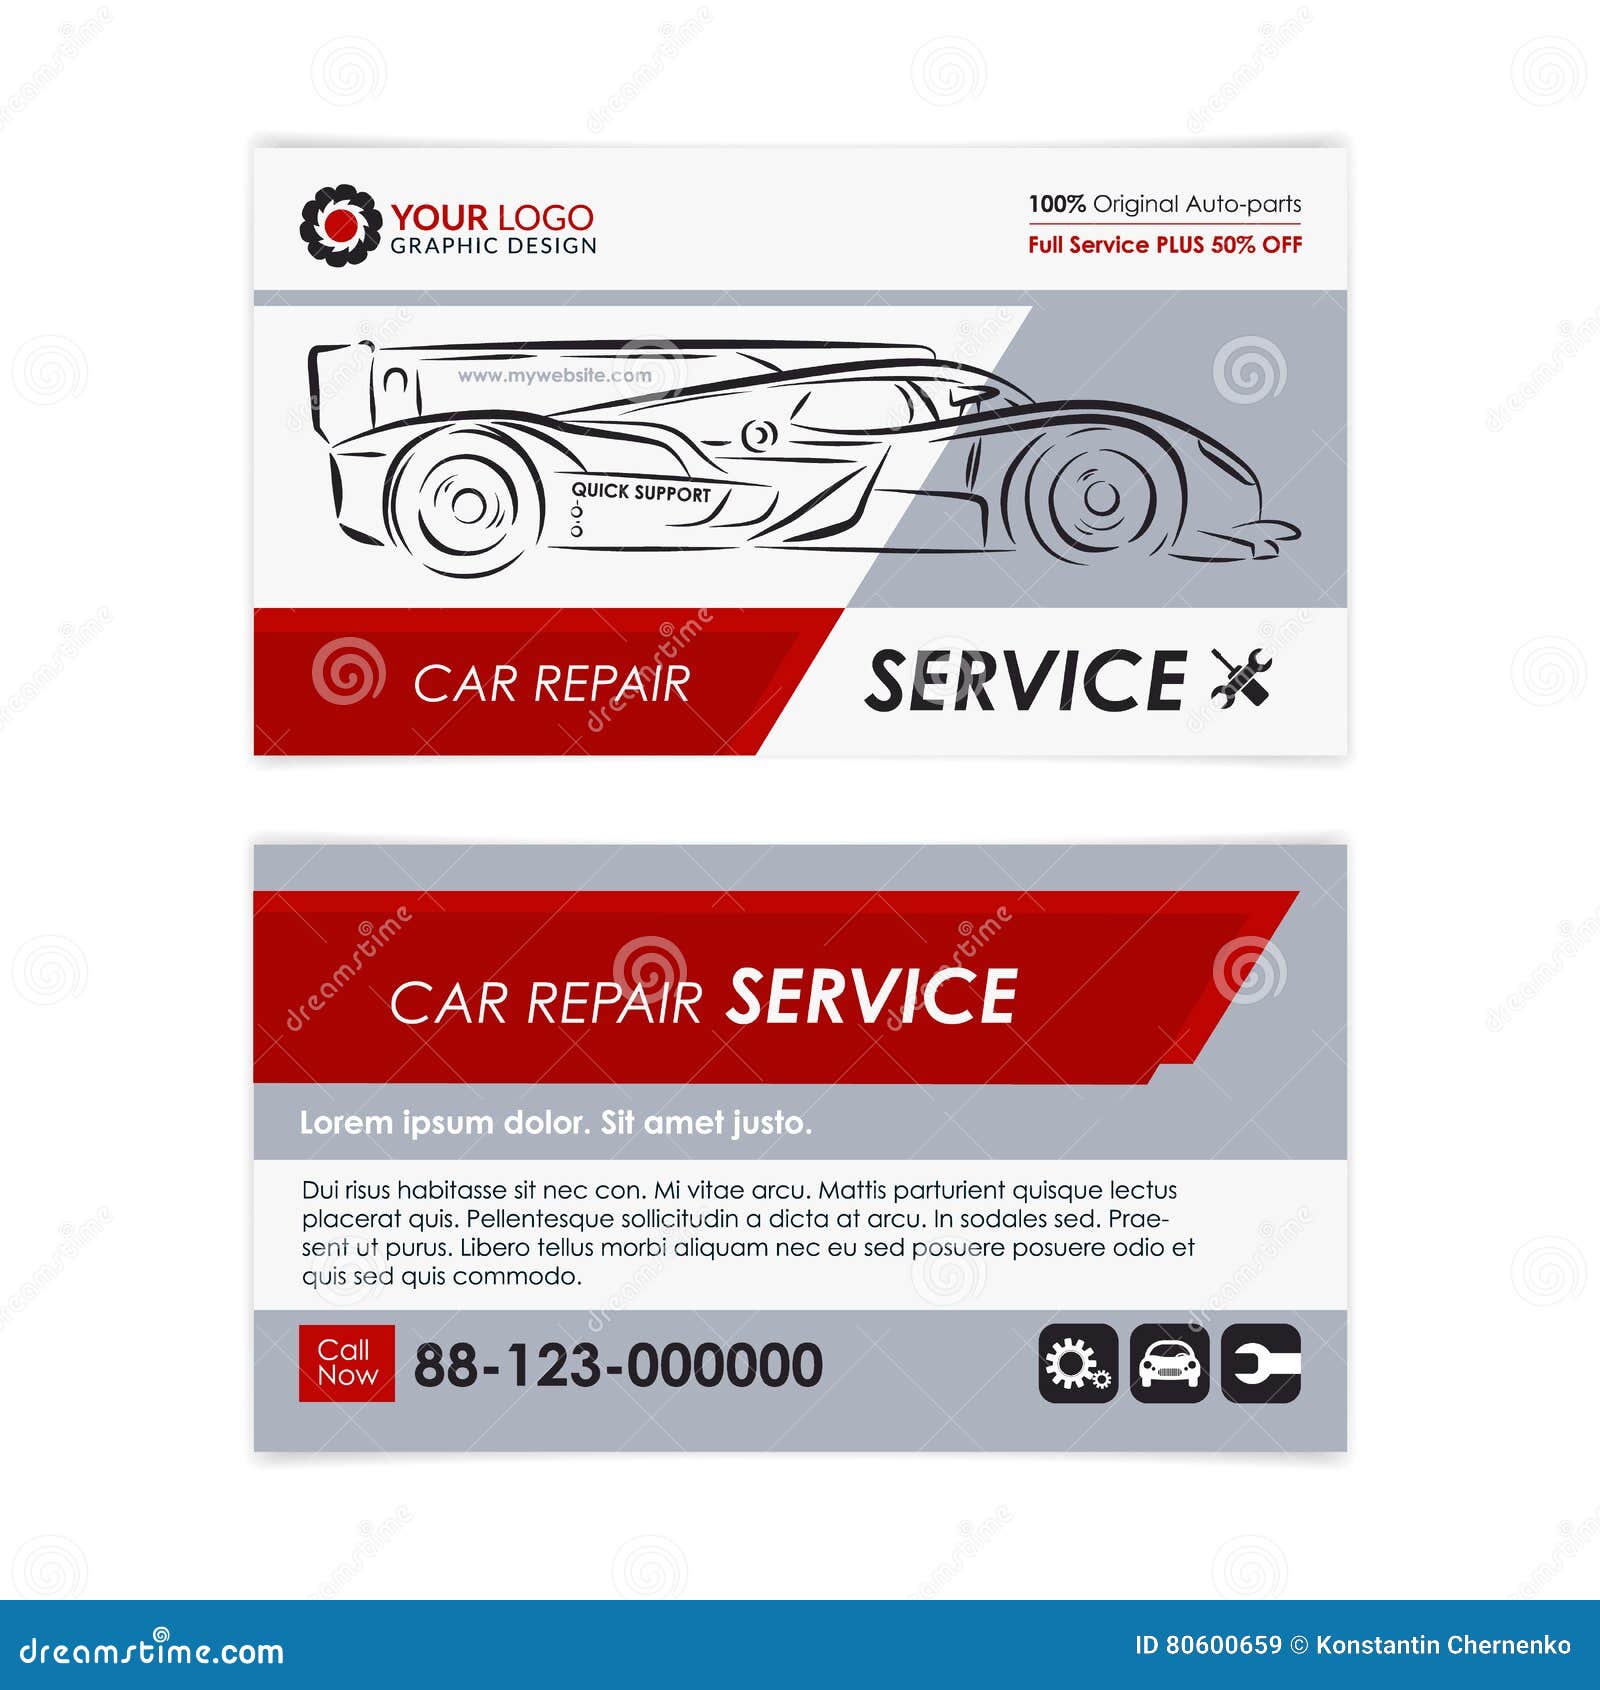 Auto Repair Business Card Template Create Your Own Business Cards Stock Vector Illustration Of Elegant Print 80600659